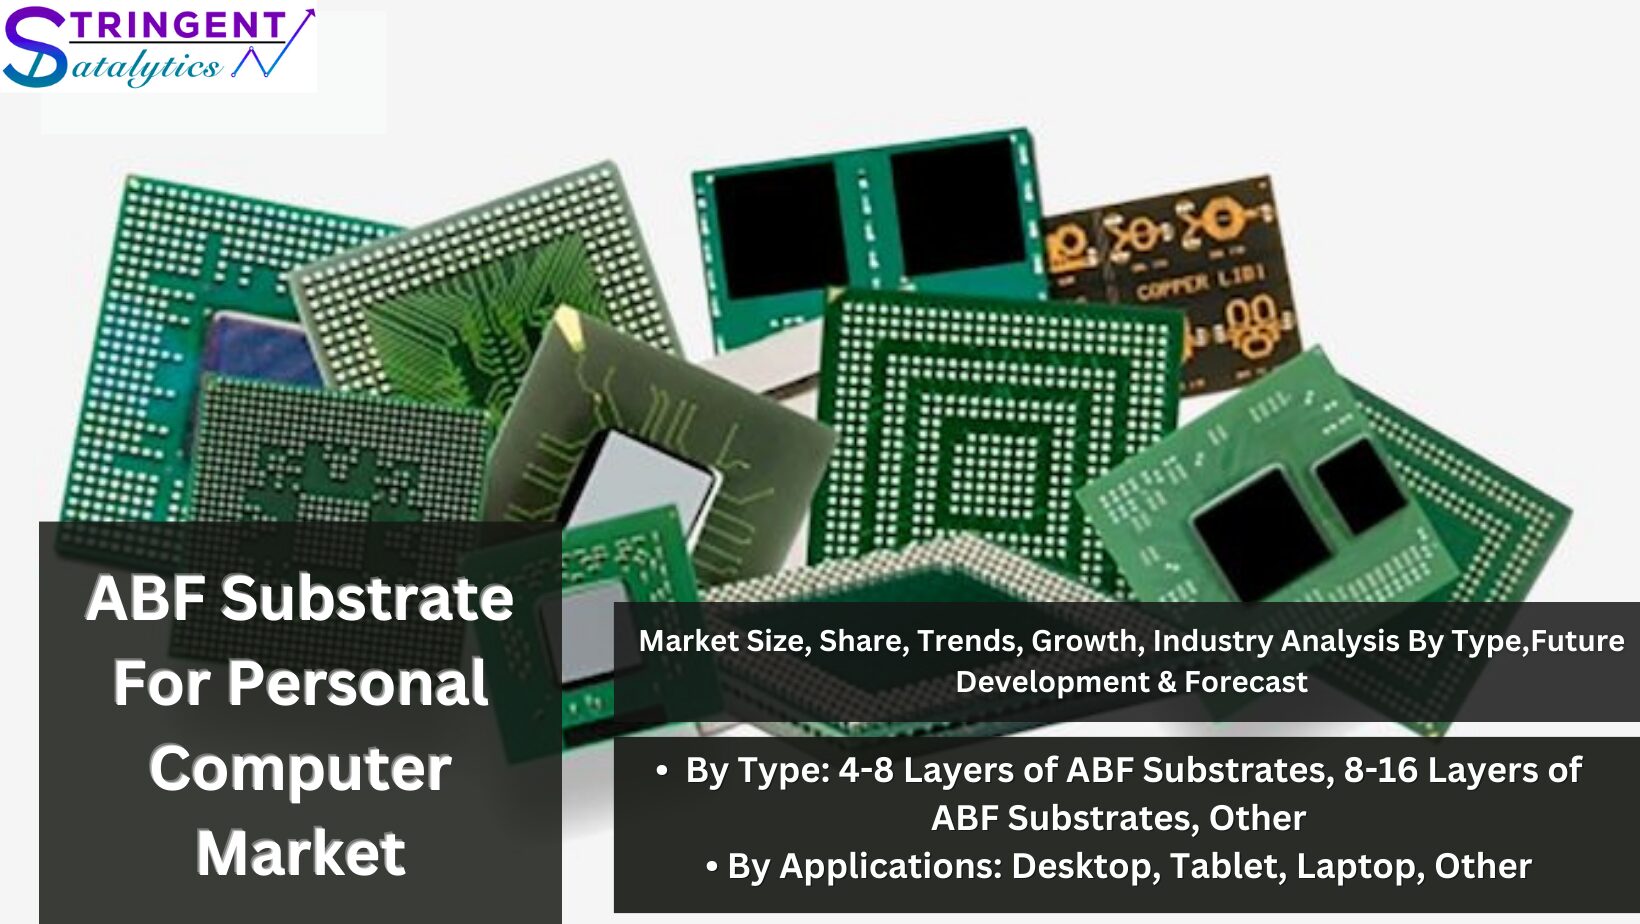 ABF Substrate for Personal Computer Market Consumption Analysis, Key Vendors, Segments, Business Overview and Upcoming Trends 2032